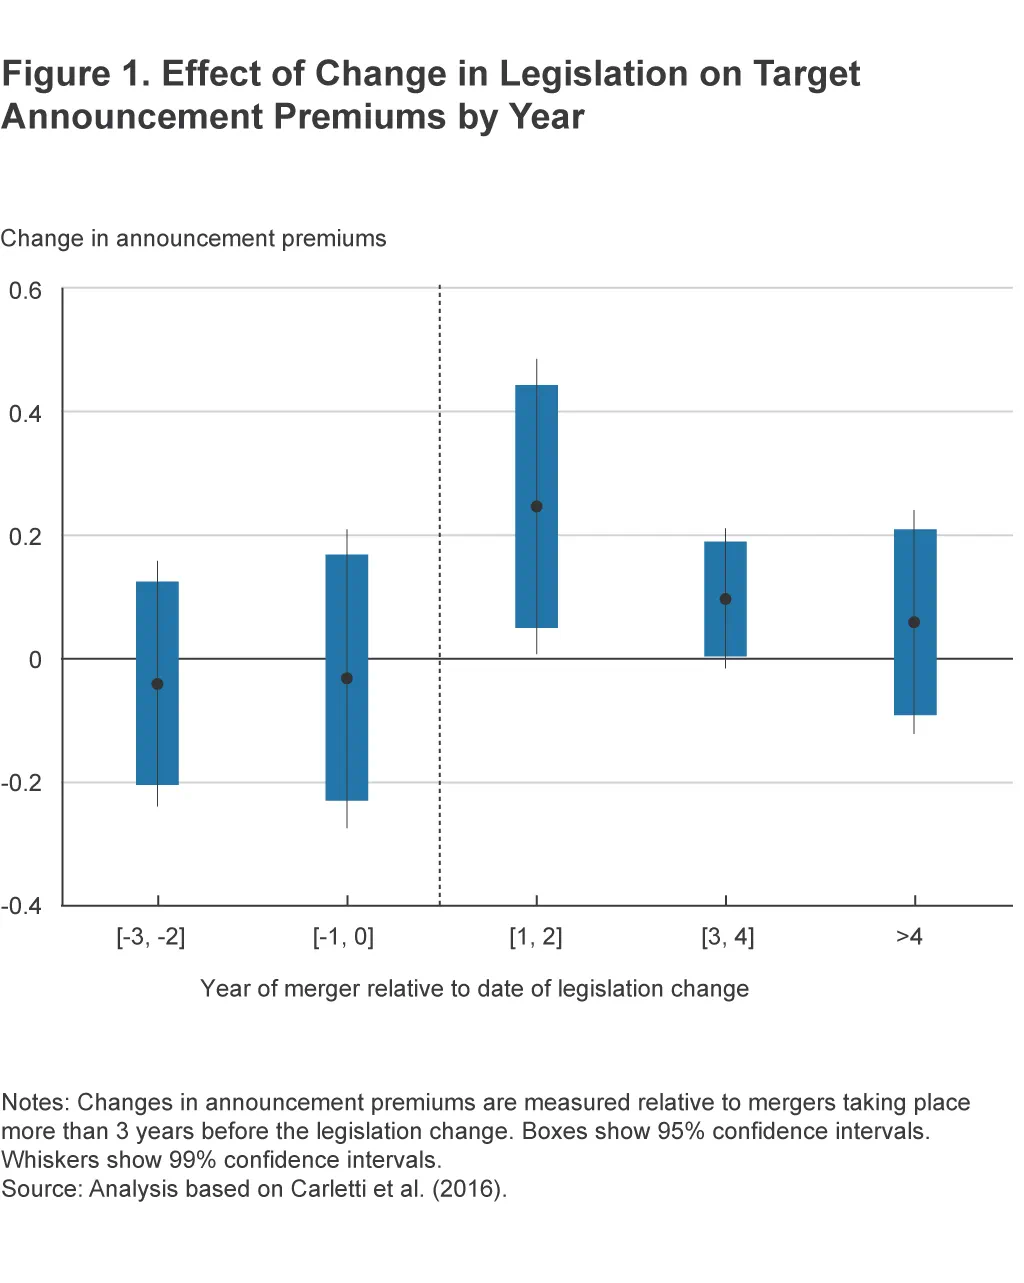 Figure 1. Effect of Change in Legislation on Target Announcement Premiums by Year